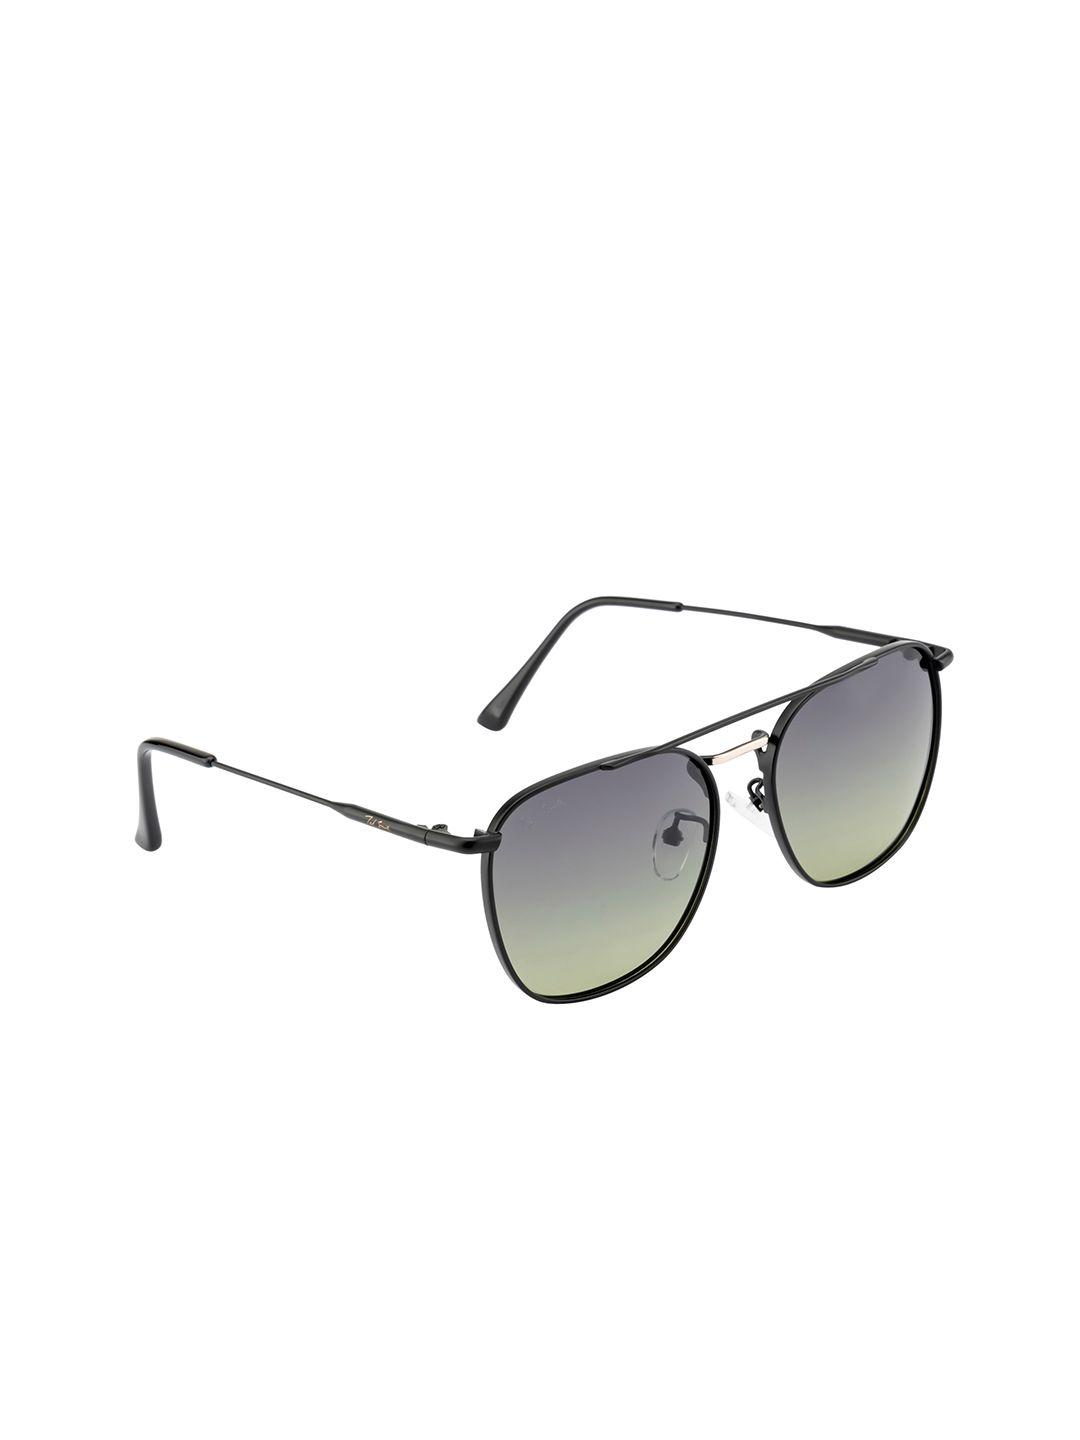 ted smith unisex square sunglasses with uv protected lens